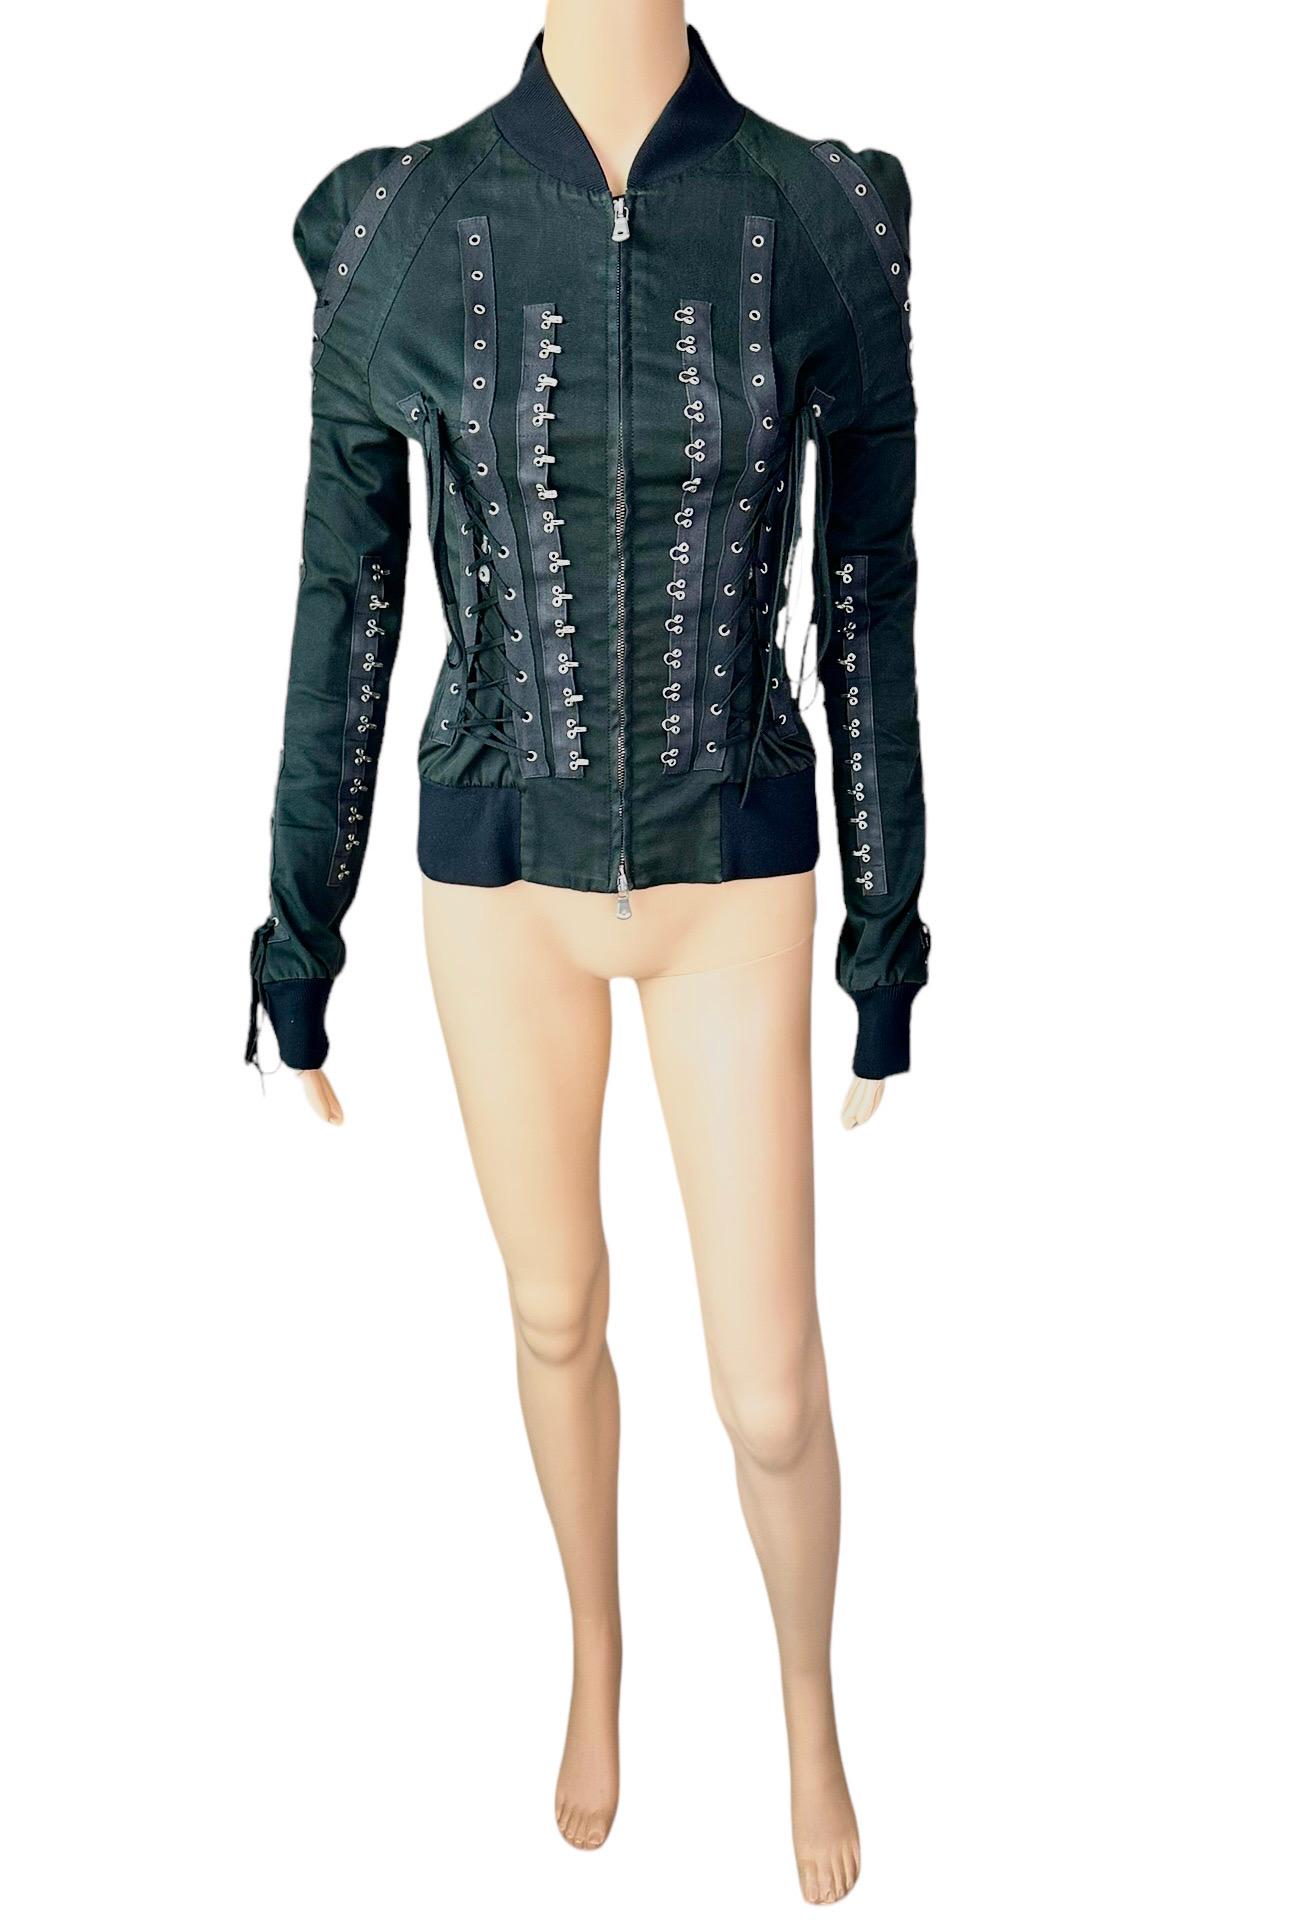 Dolce & Gabbana F/W 2003 Corset Lace Up Hook and Eye Black Top Jacket For Sale 6